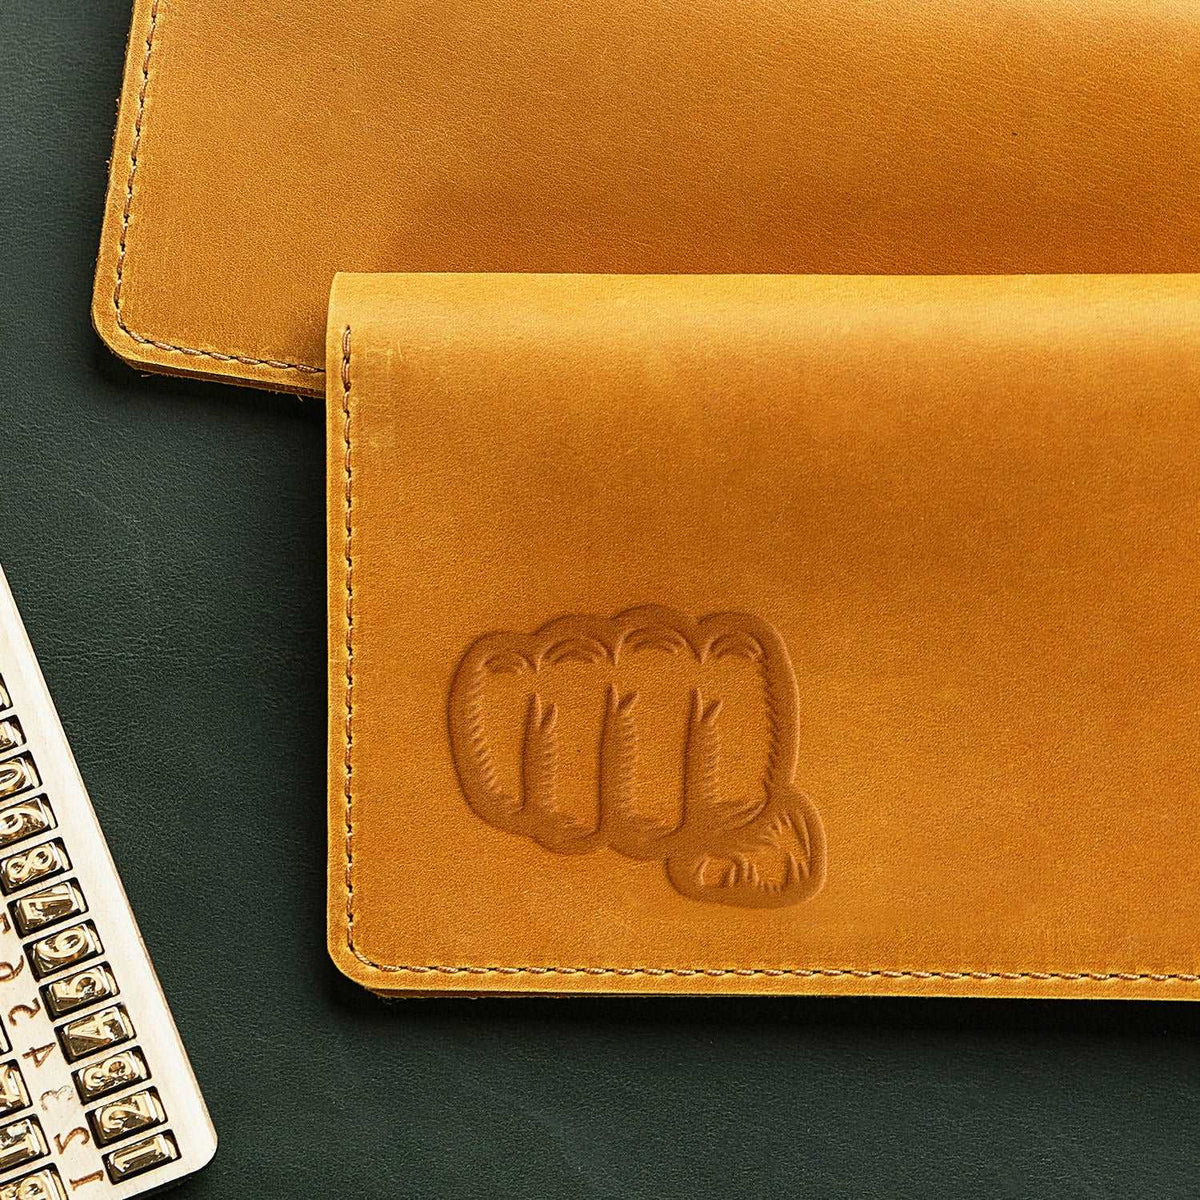 Fist Delrin Leather Stamp